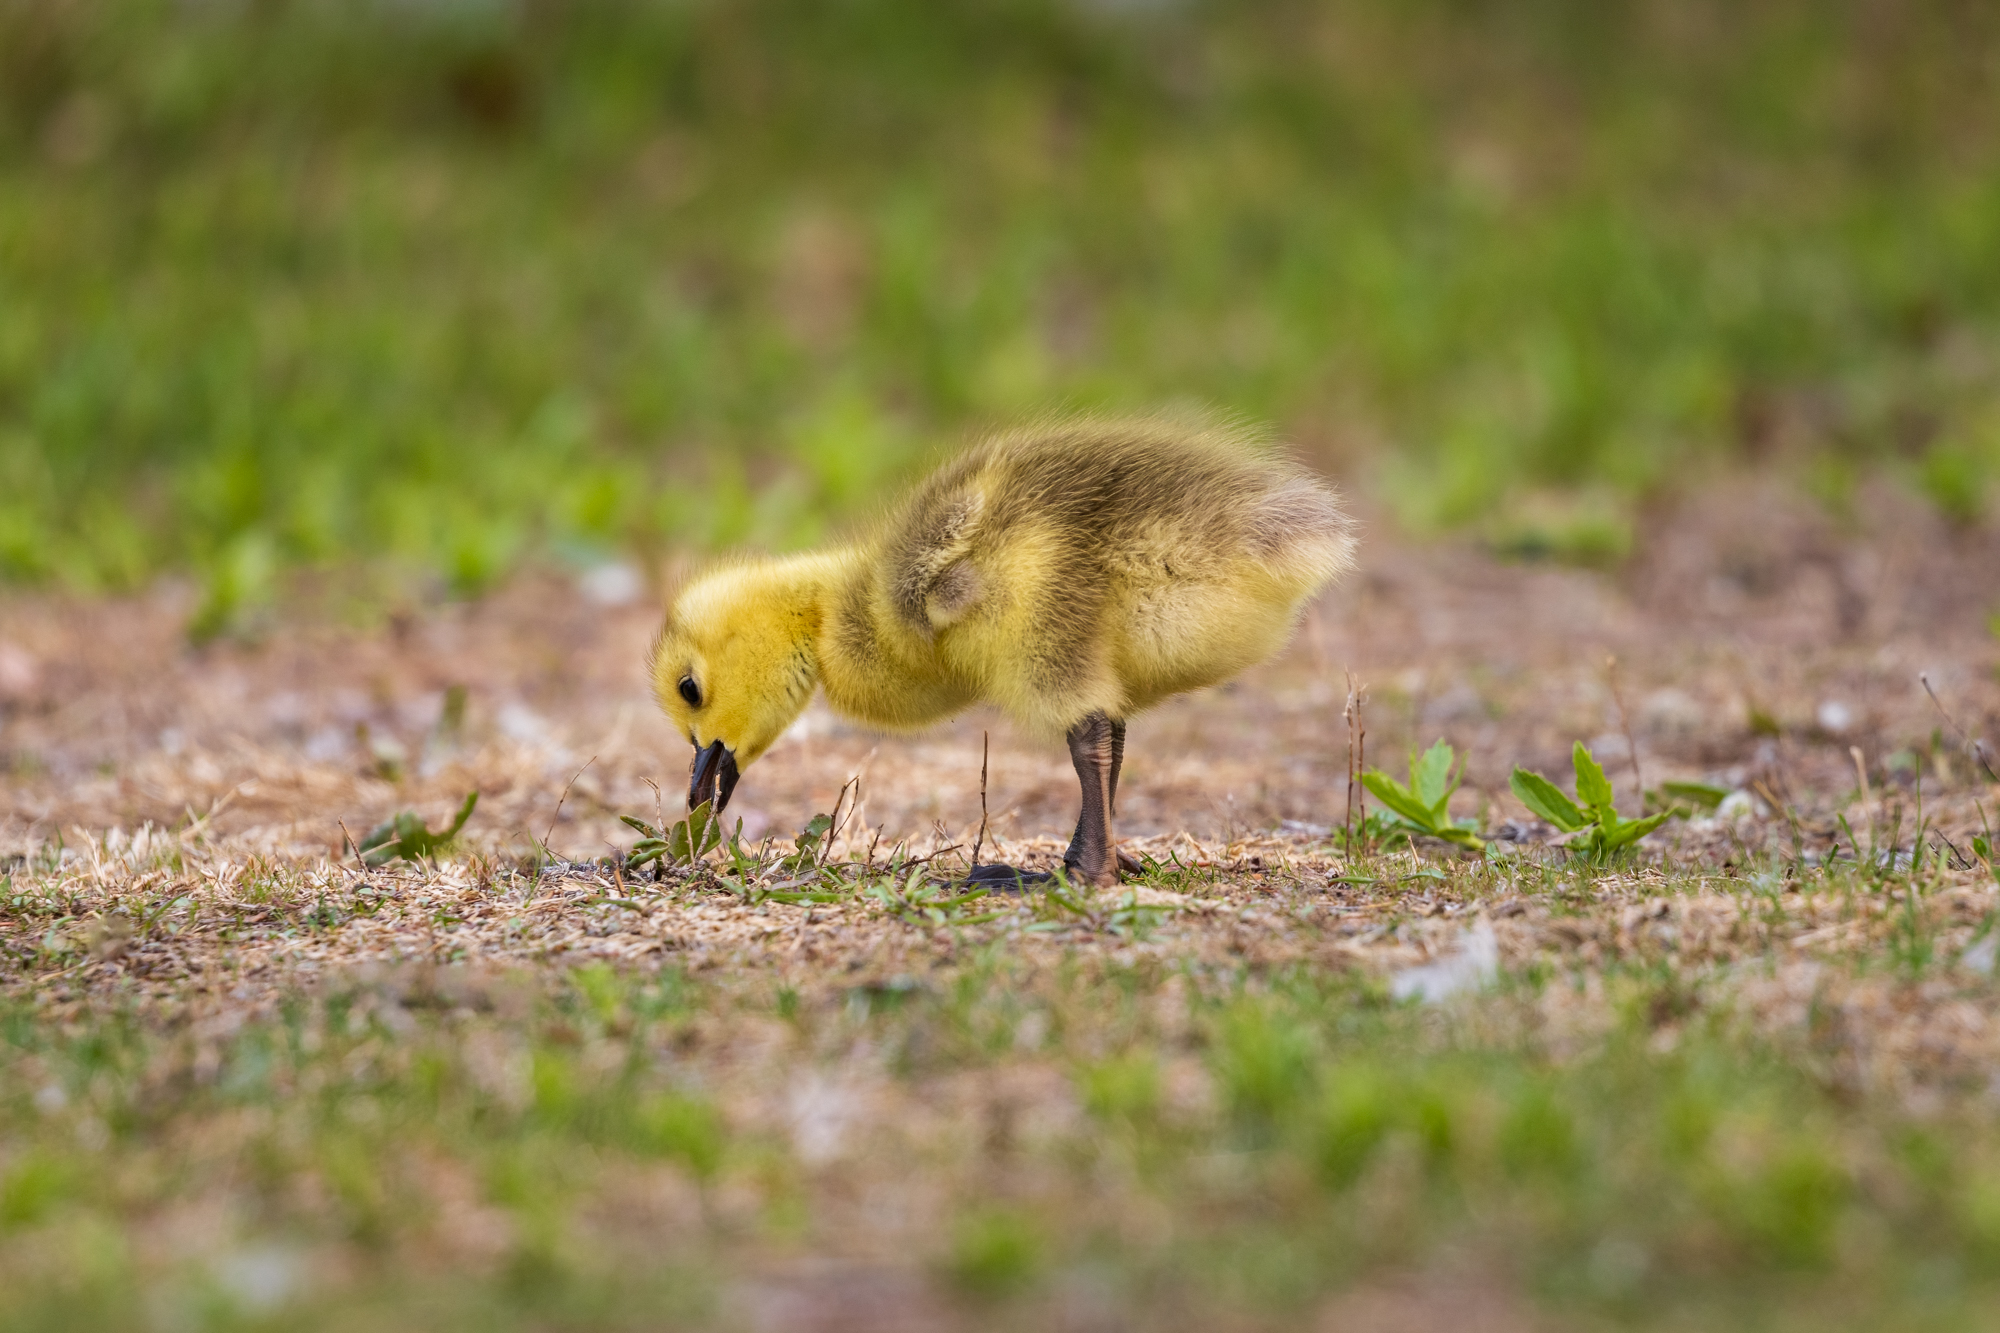 Canada Goose (gosling) pecking at the ground